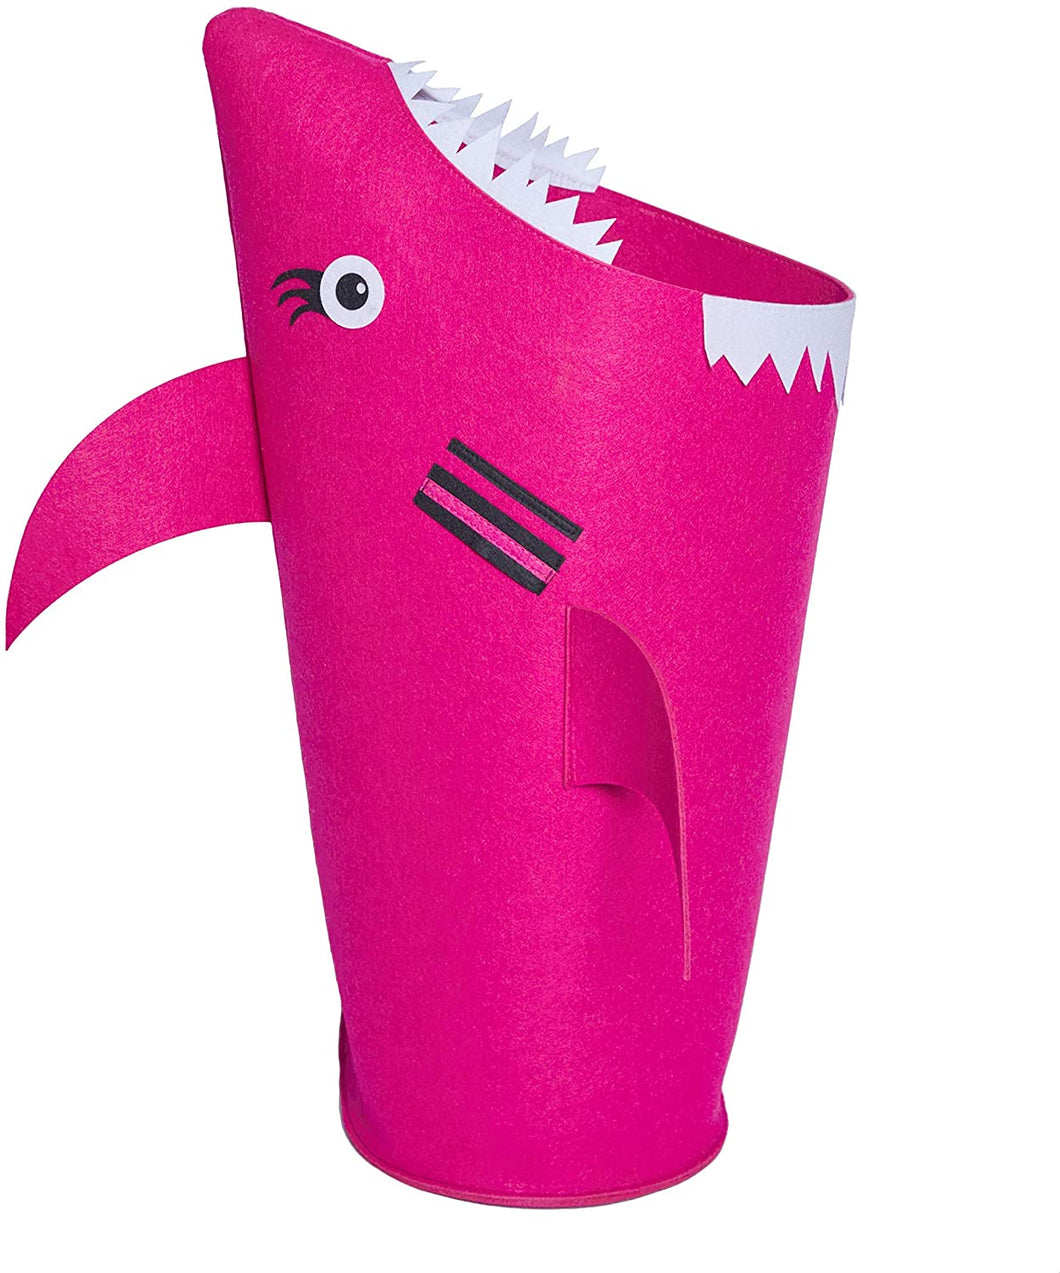 Baby Shark Laundry Basket for Kids for bedroom and bathroom - Pink